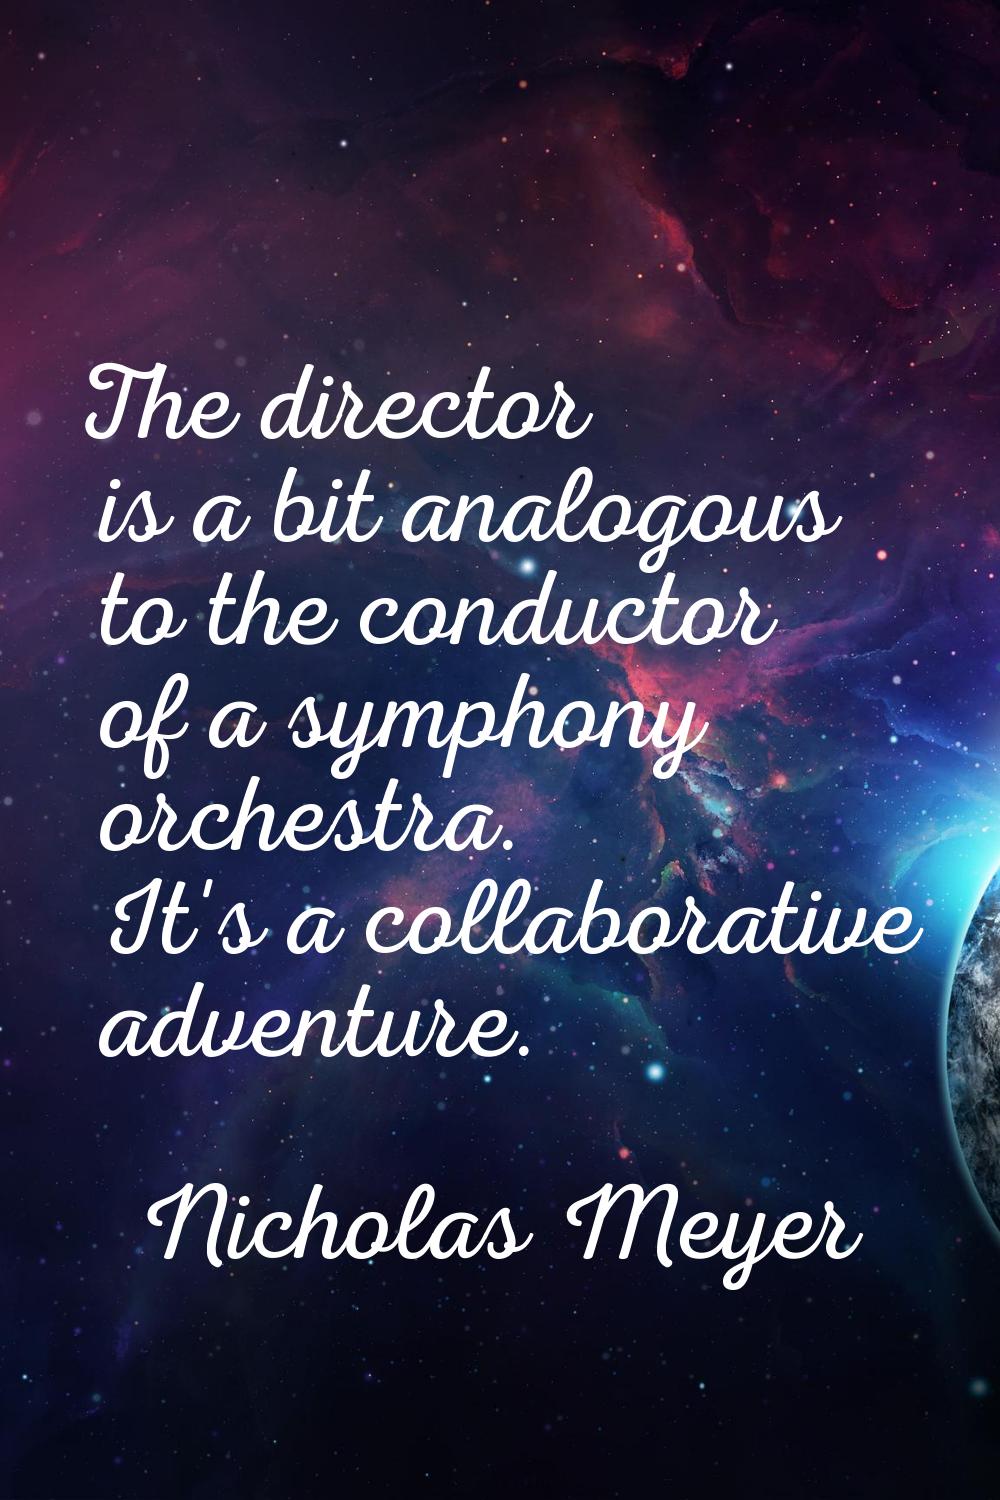 The director is a bit analogous to the conductor of a symphony orchestra. It's a collaborative adve